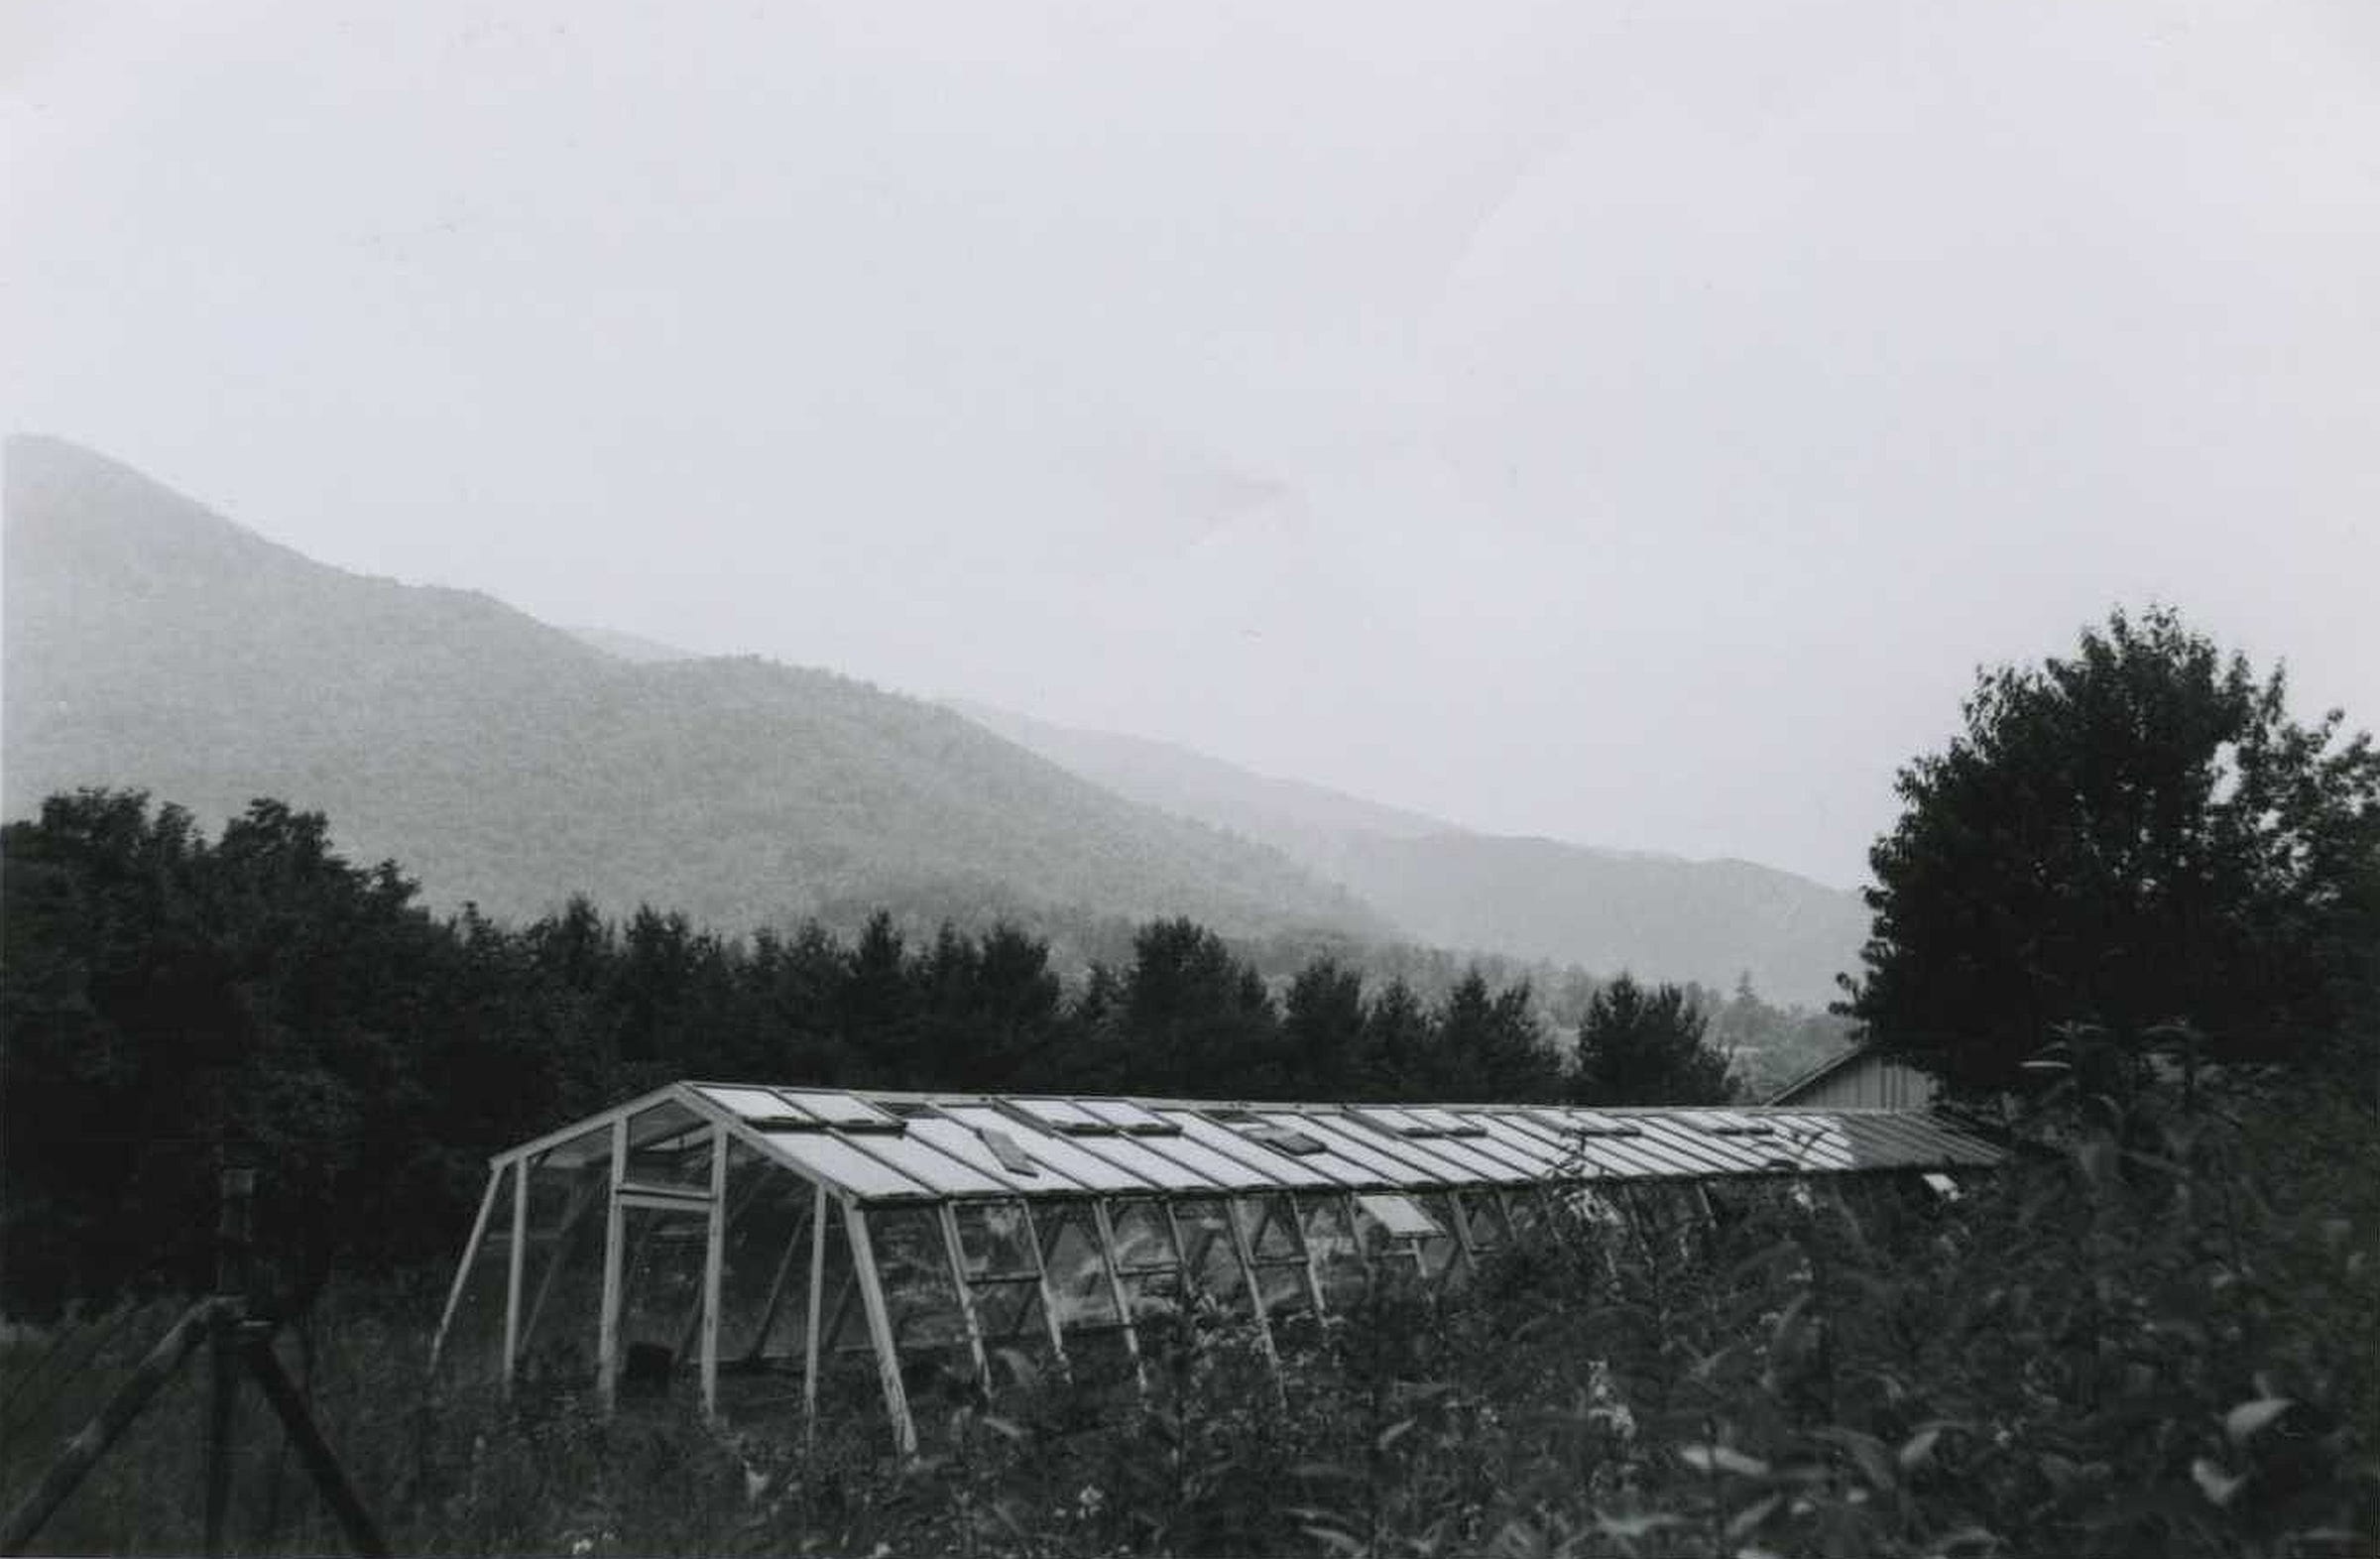 A greenhouse located on Terry Estate, also known as InTheOaks, delayed the sale of the property in 1959. Staff at the Swannanoa Valley Museum & History Center uncovered correspondence between the attorneys tasked with sorting out the matter.